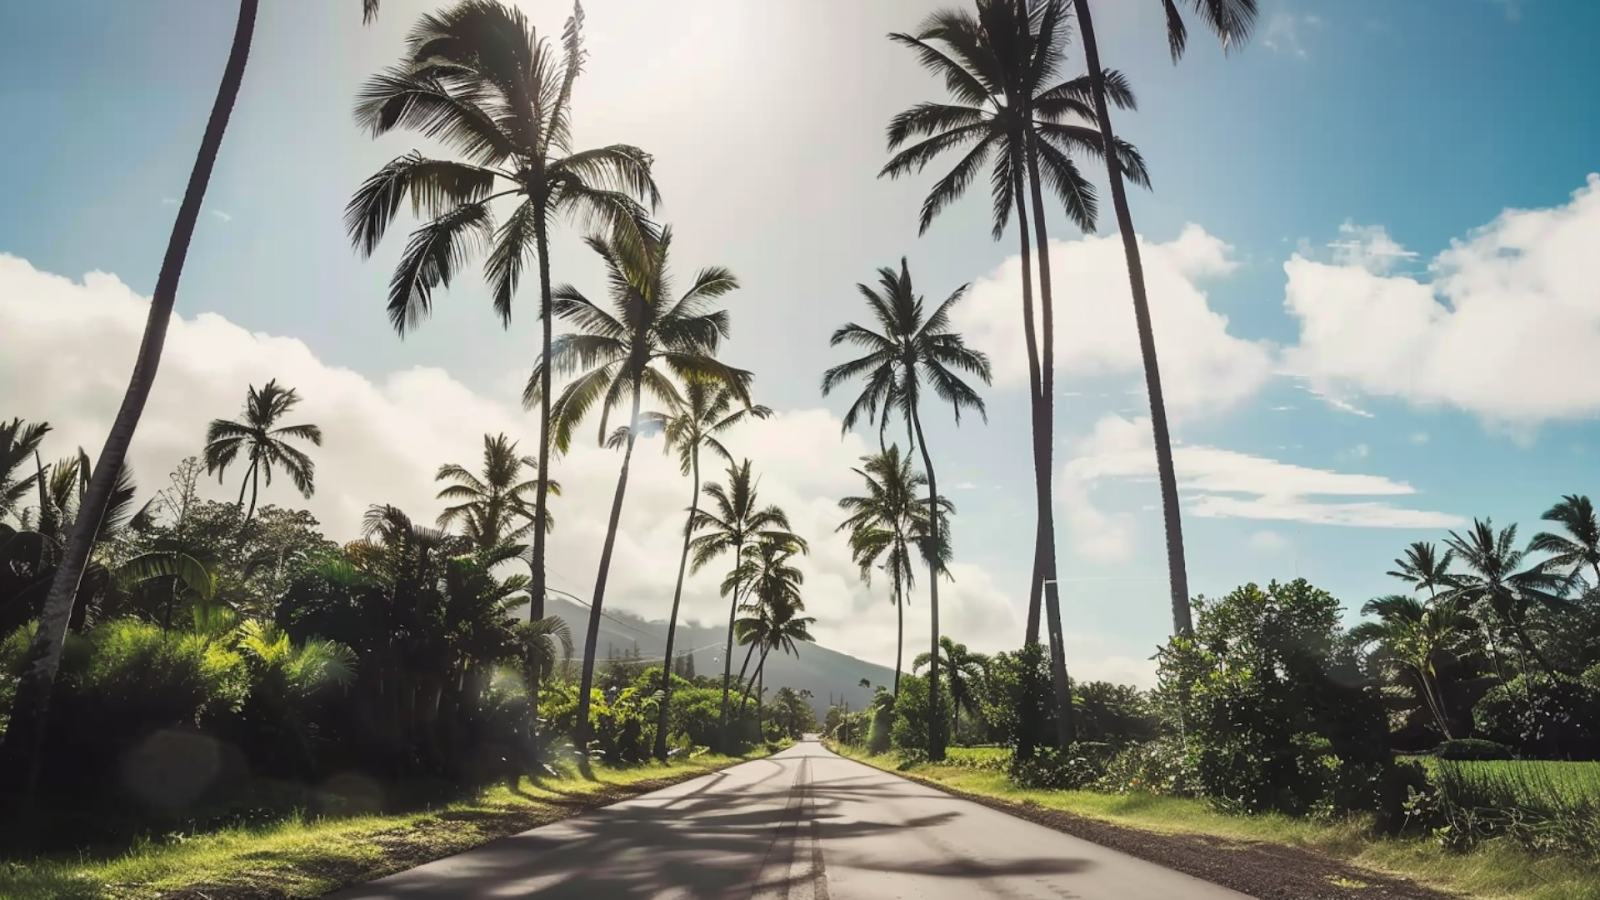 A concrete road between palm trees in Hawaii